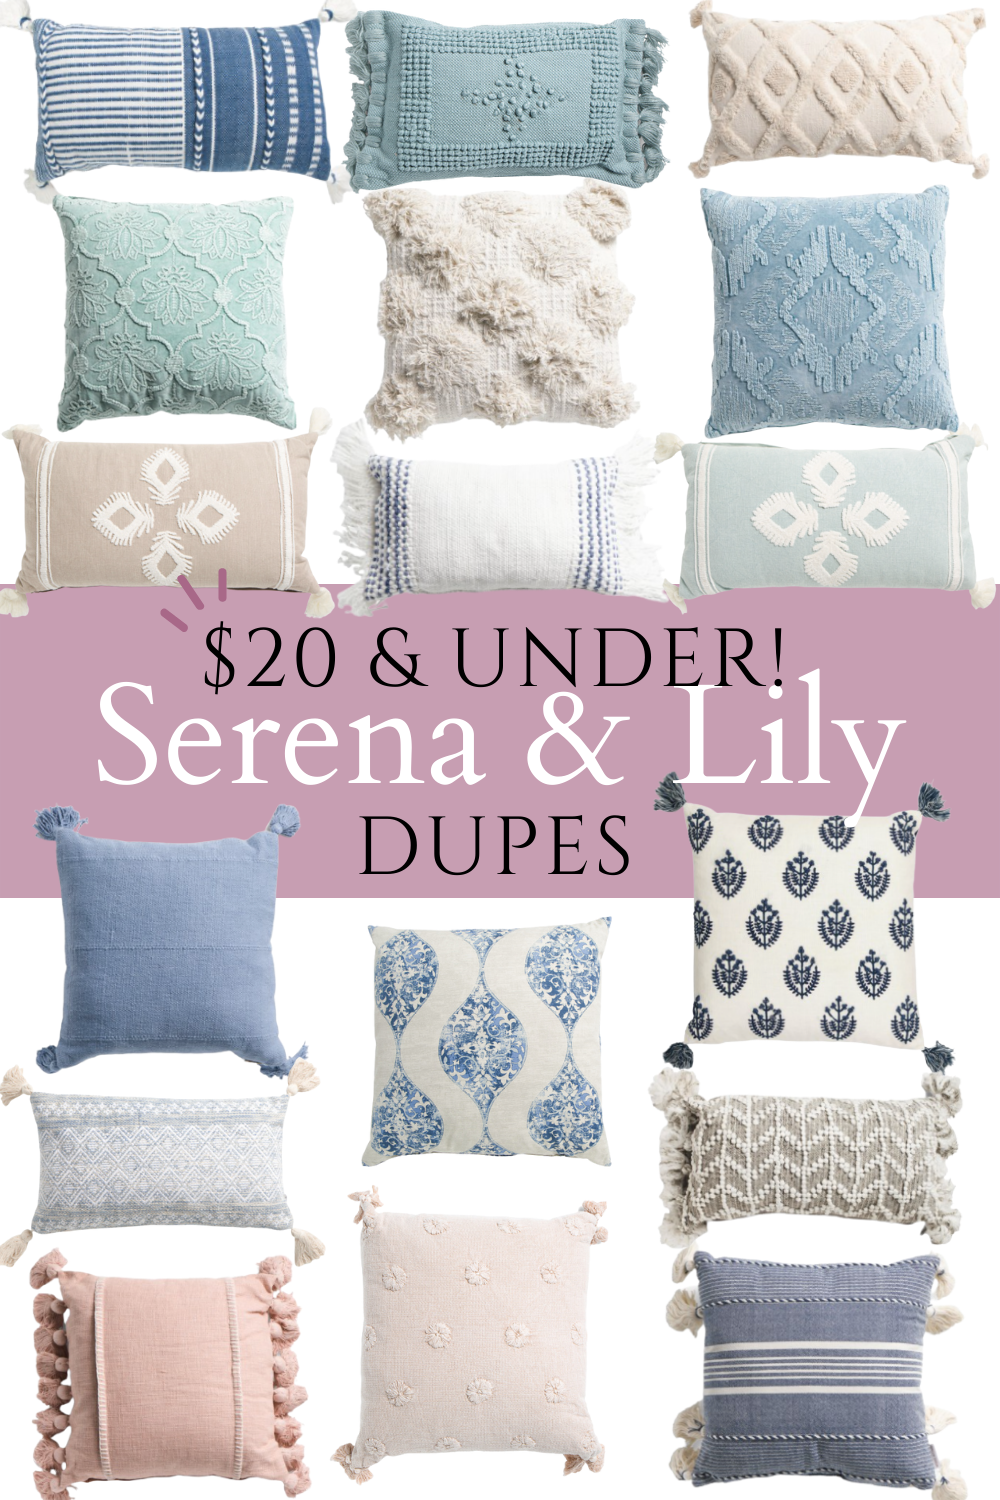 https://interiordesignforbeginners.com/wp-content/uploads/2022/03/serena-and-lily-pillow-dupes-under-20-clearance-pillows-dupe.png